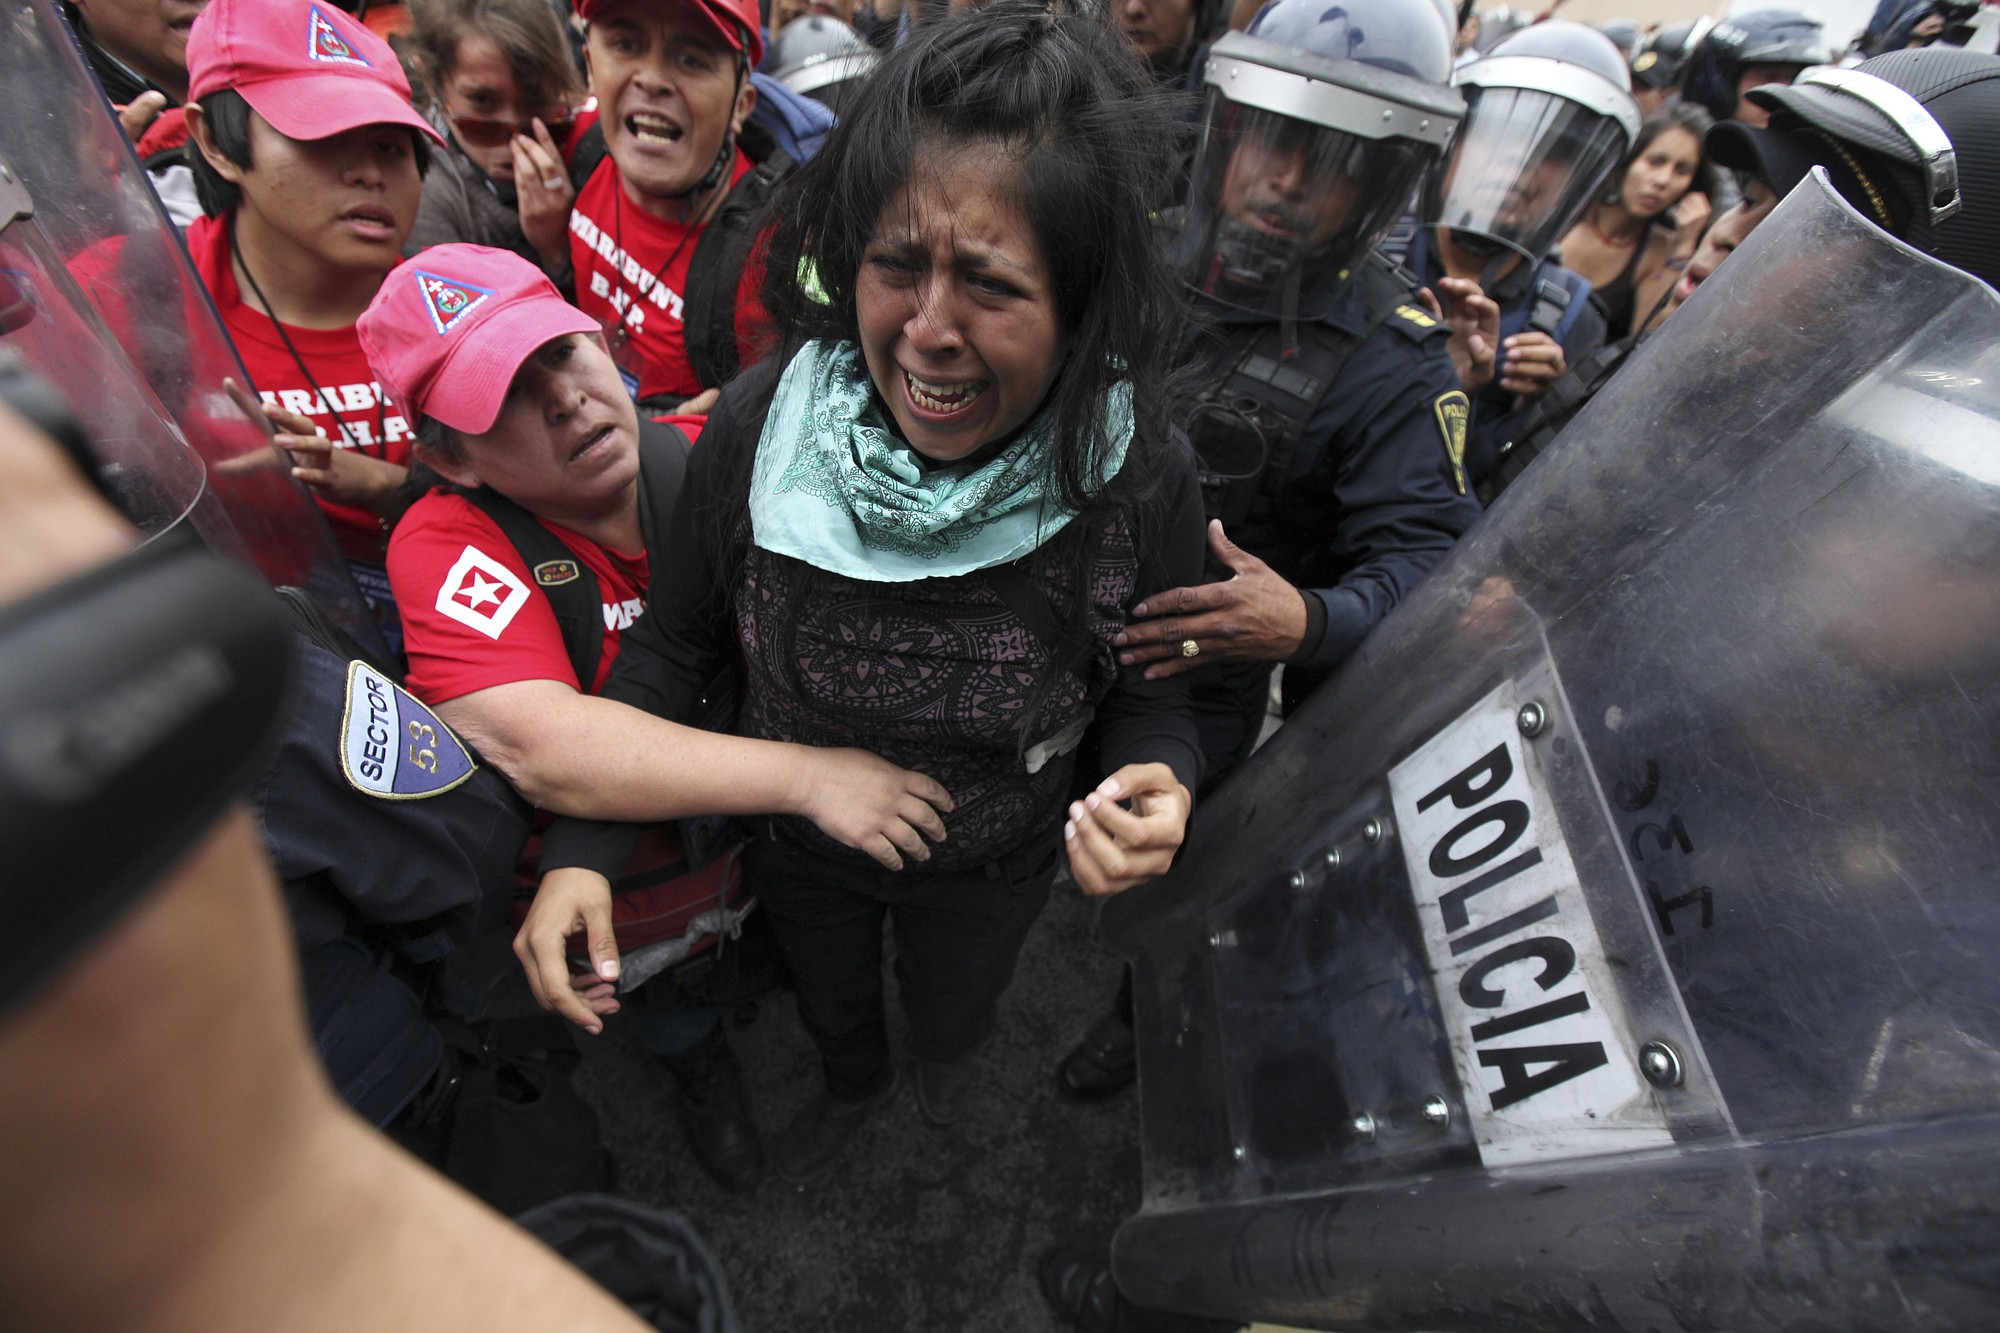 A protester cries as she is detained by police while human rights observers, left, try to reach her during a march Thursday near the airport in Mexico City.